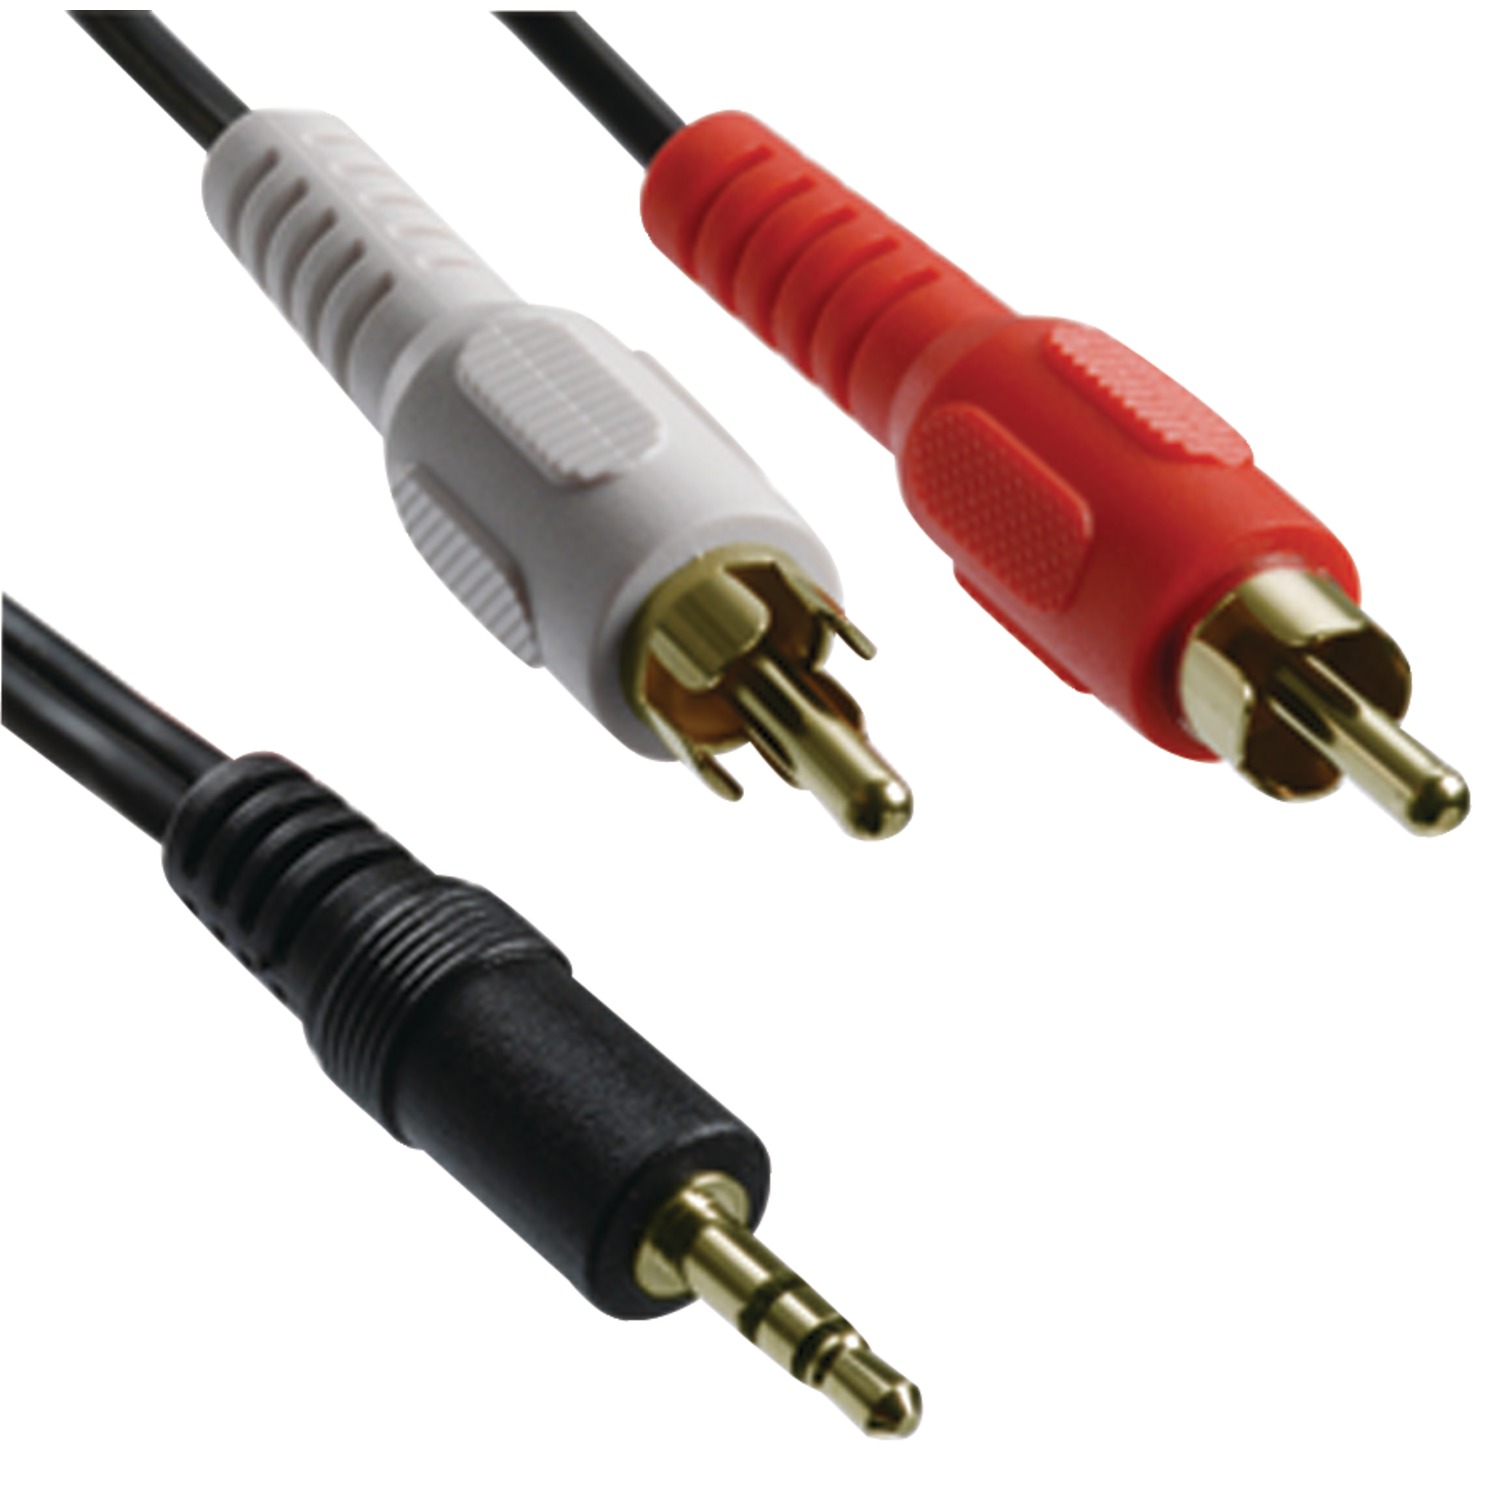 Axis Y-adapter With 3.5mm Stereo Plug To 2 Rca Plugs, 3ft - image 1 of 2